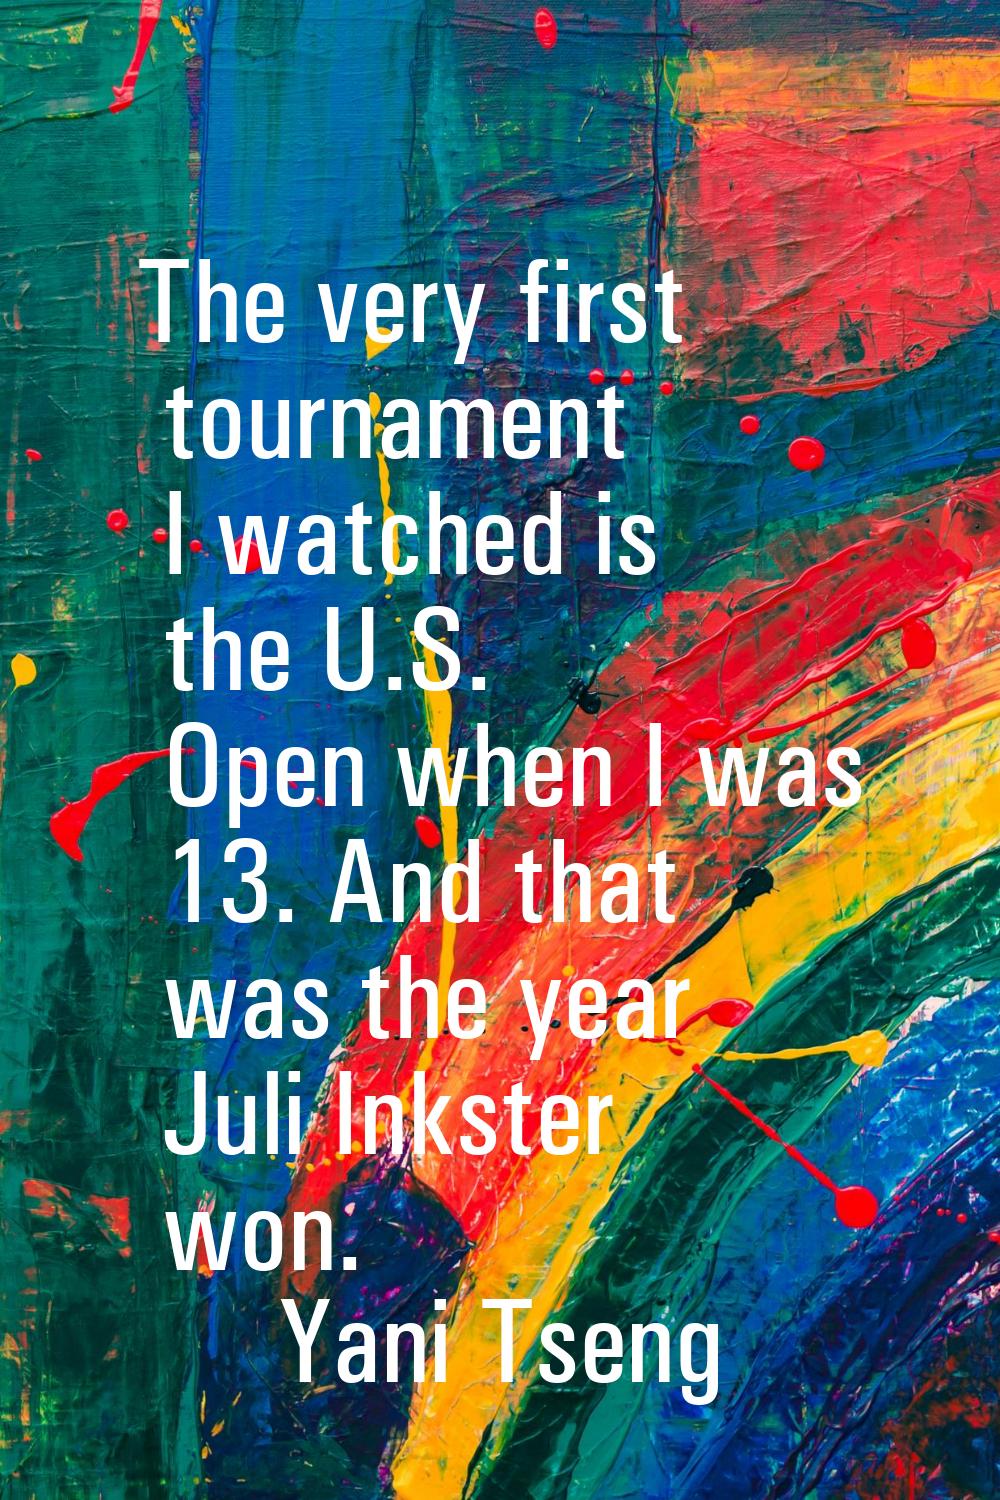 The very first tournament I watched is the U.S. Open when I was 13. And that was the year Juli Inks